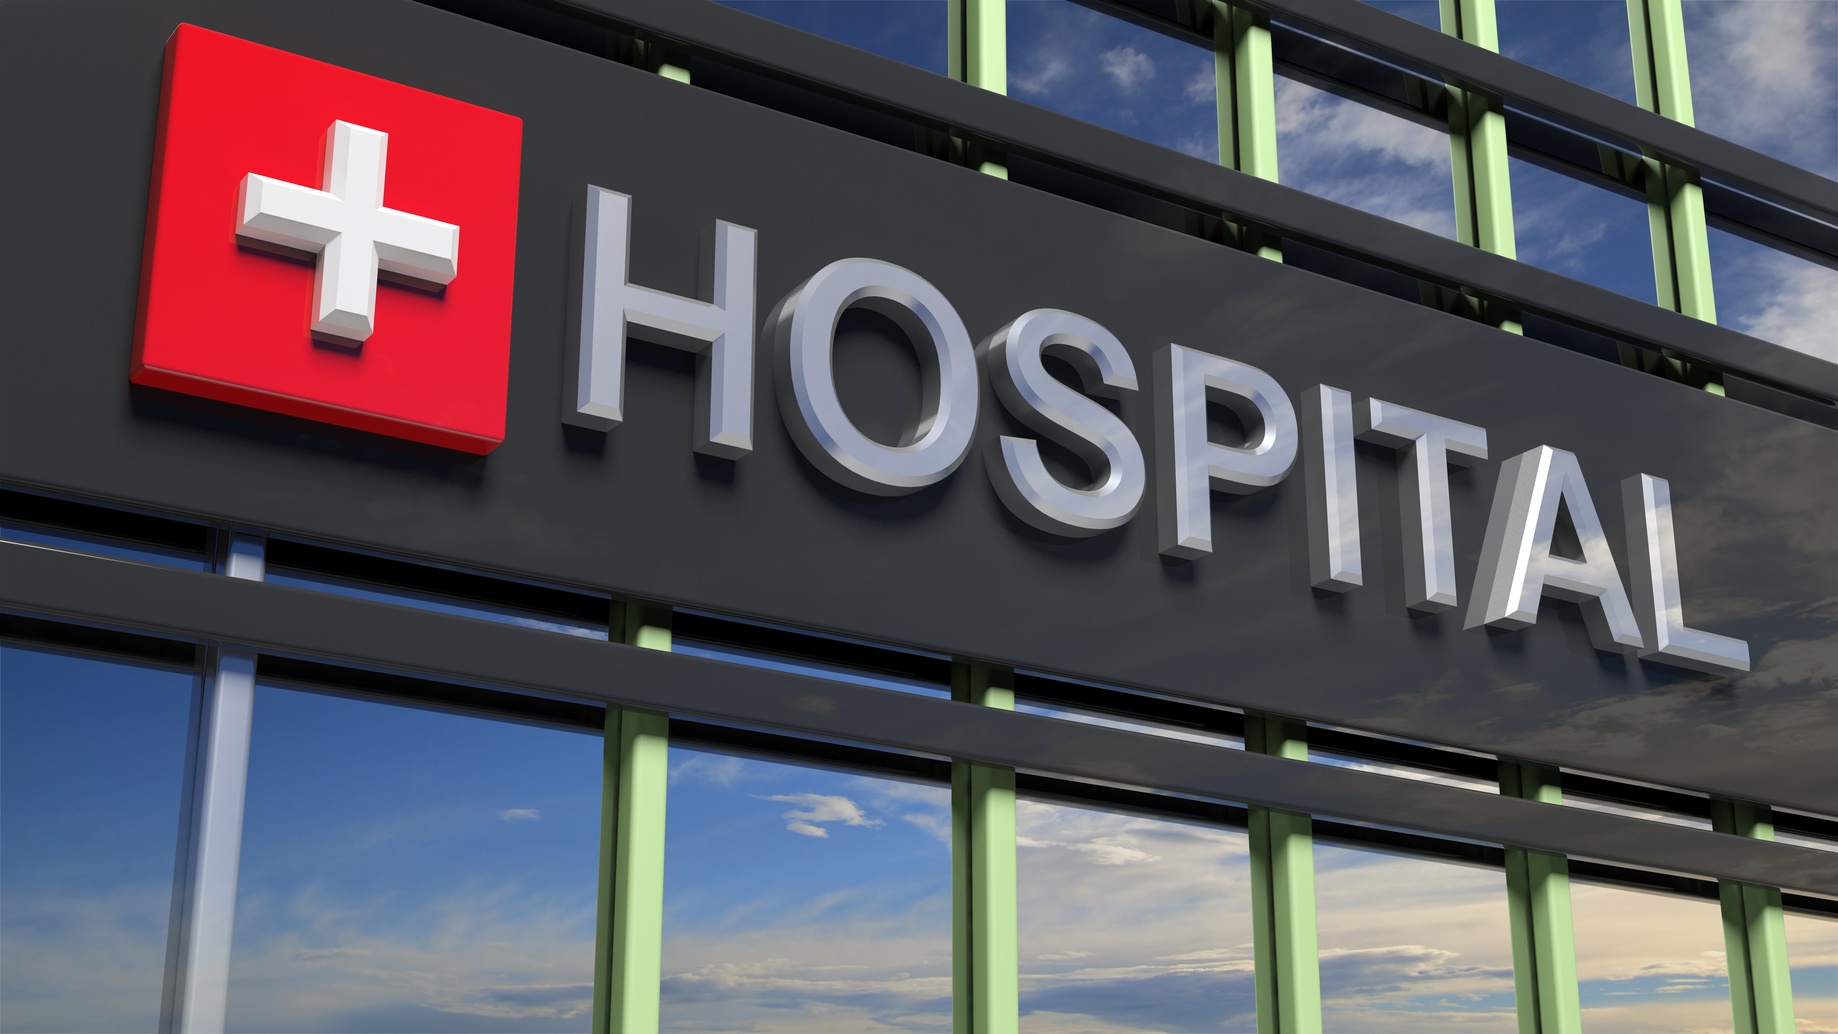 Tips for Hospital Patients | Vanguard Communications Research | Denver, CO